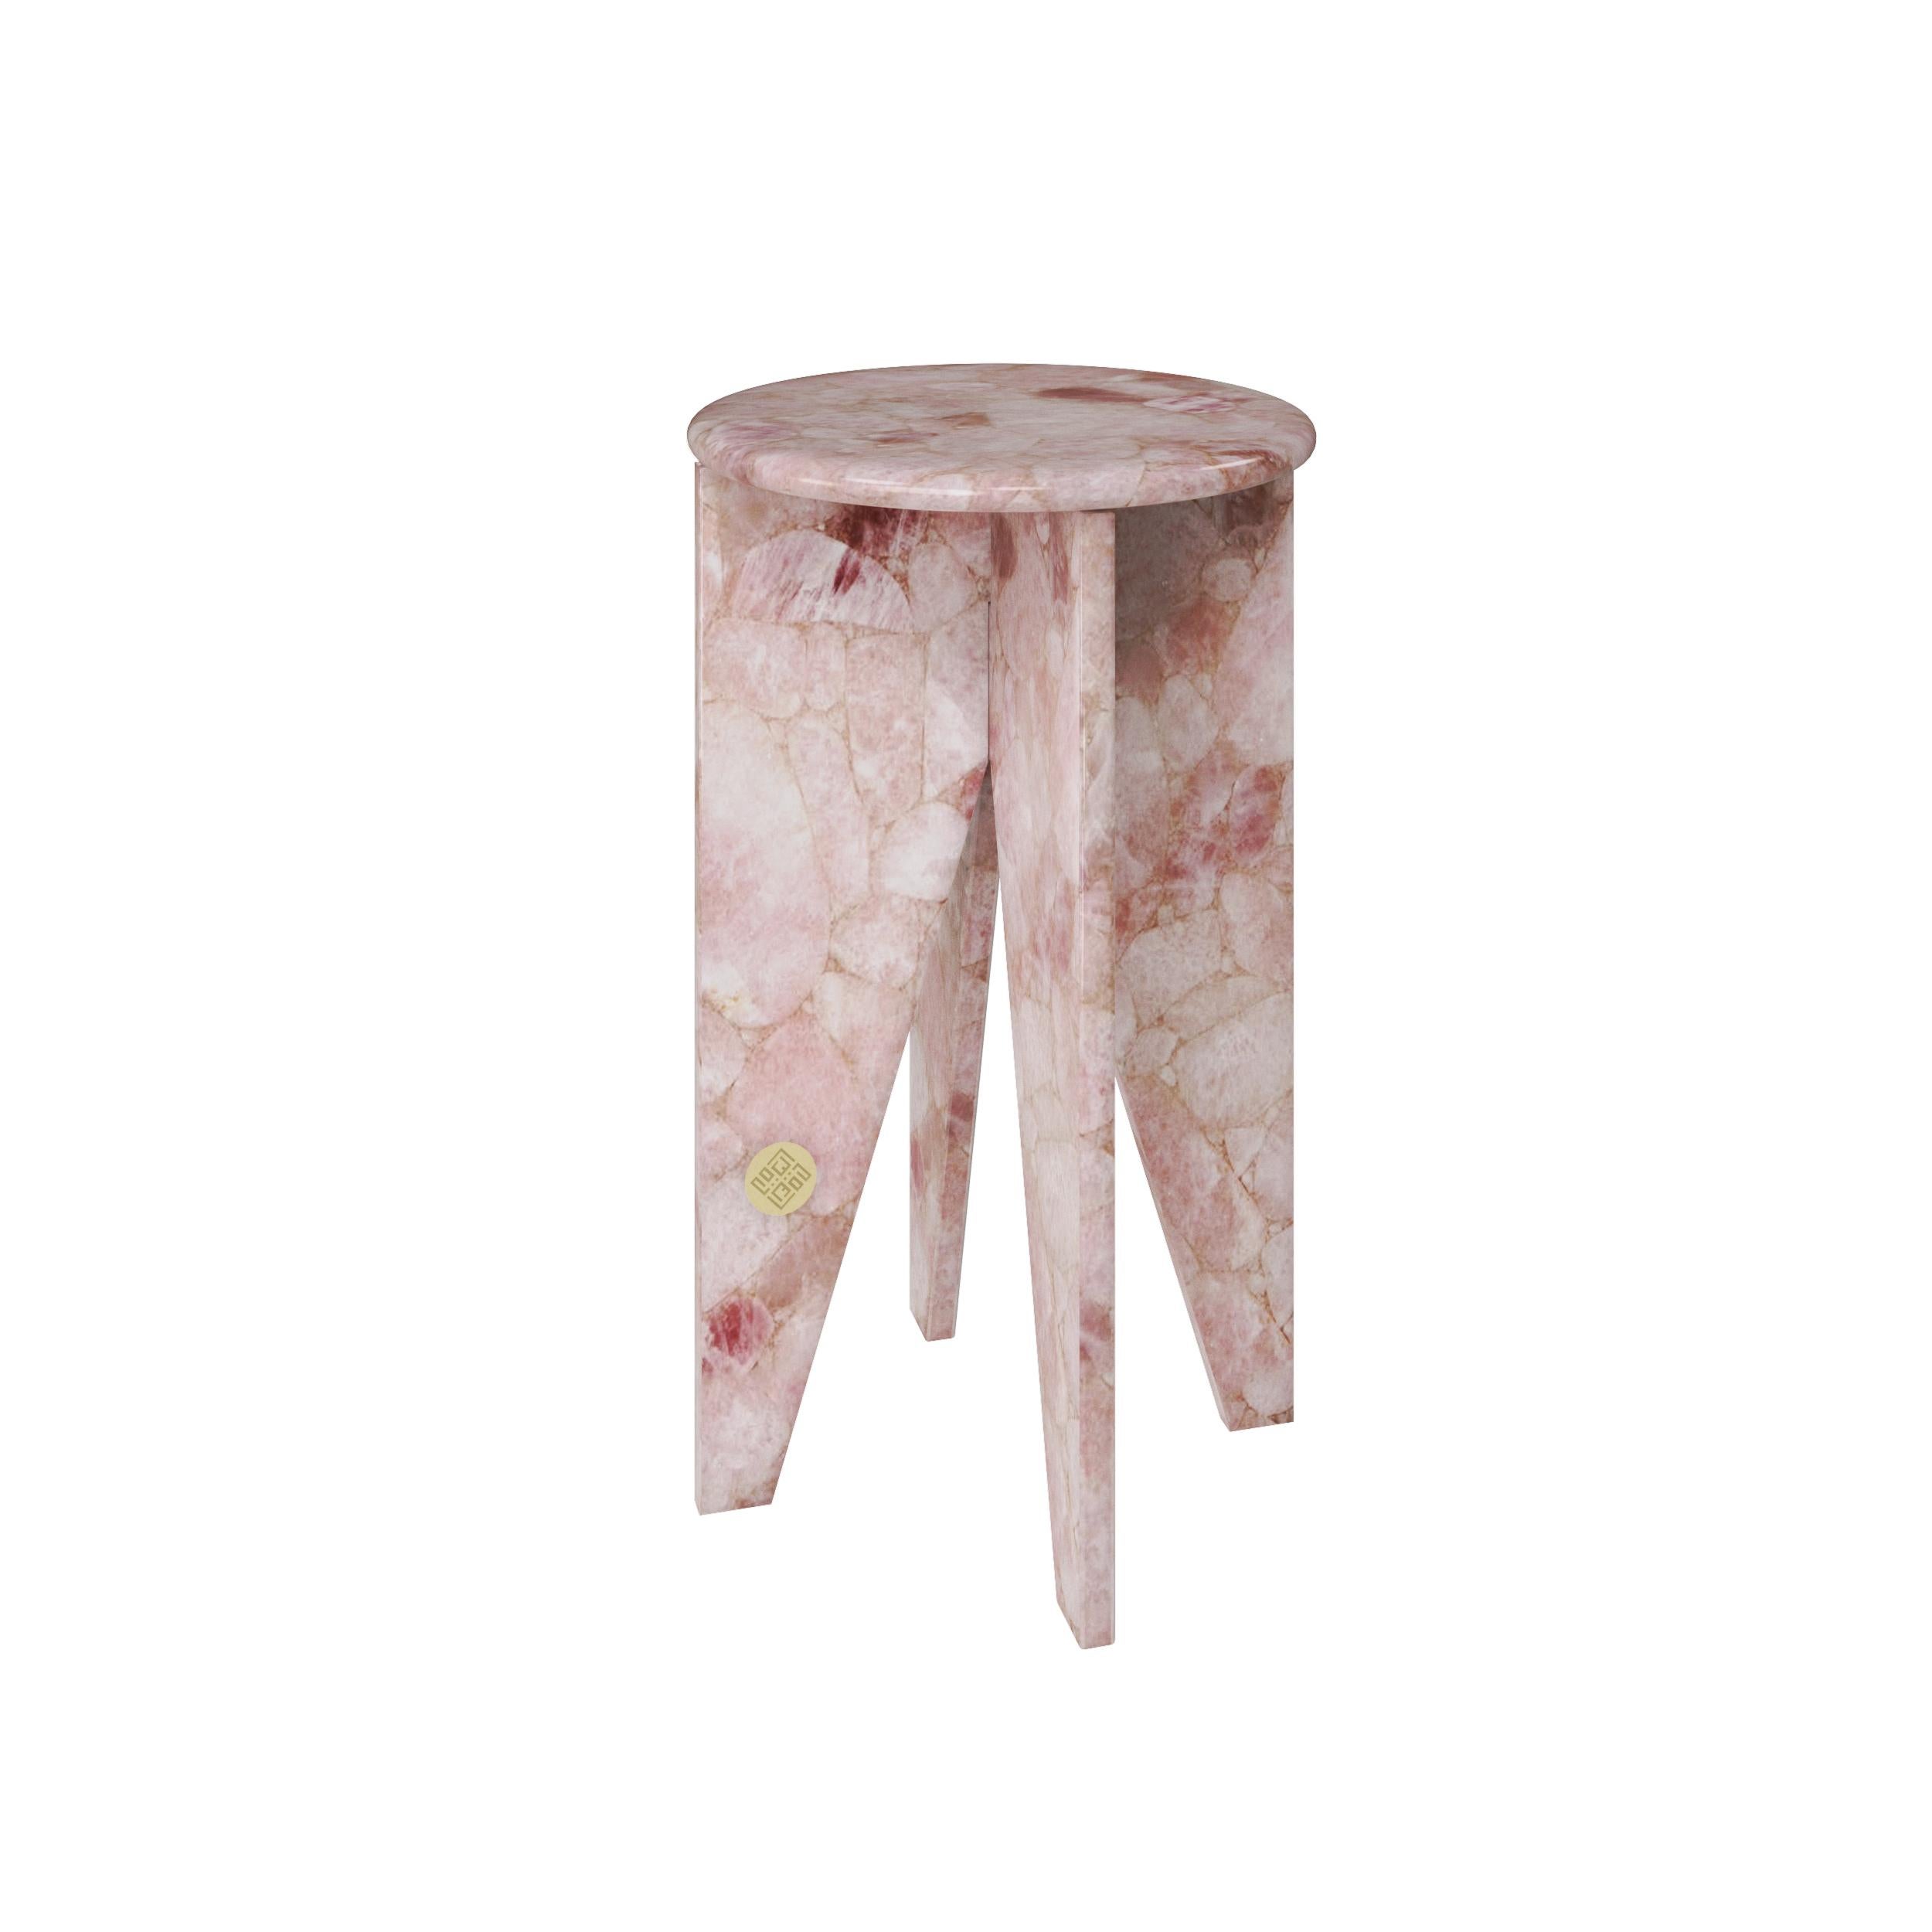 Spanish Quartz Eli Baby Love Side Table Handsculpted by Element&Co